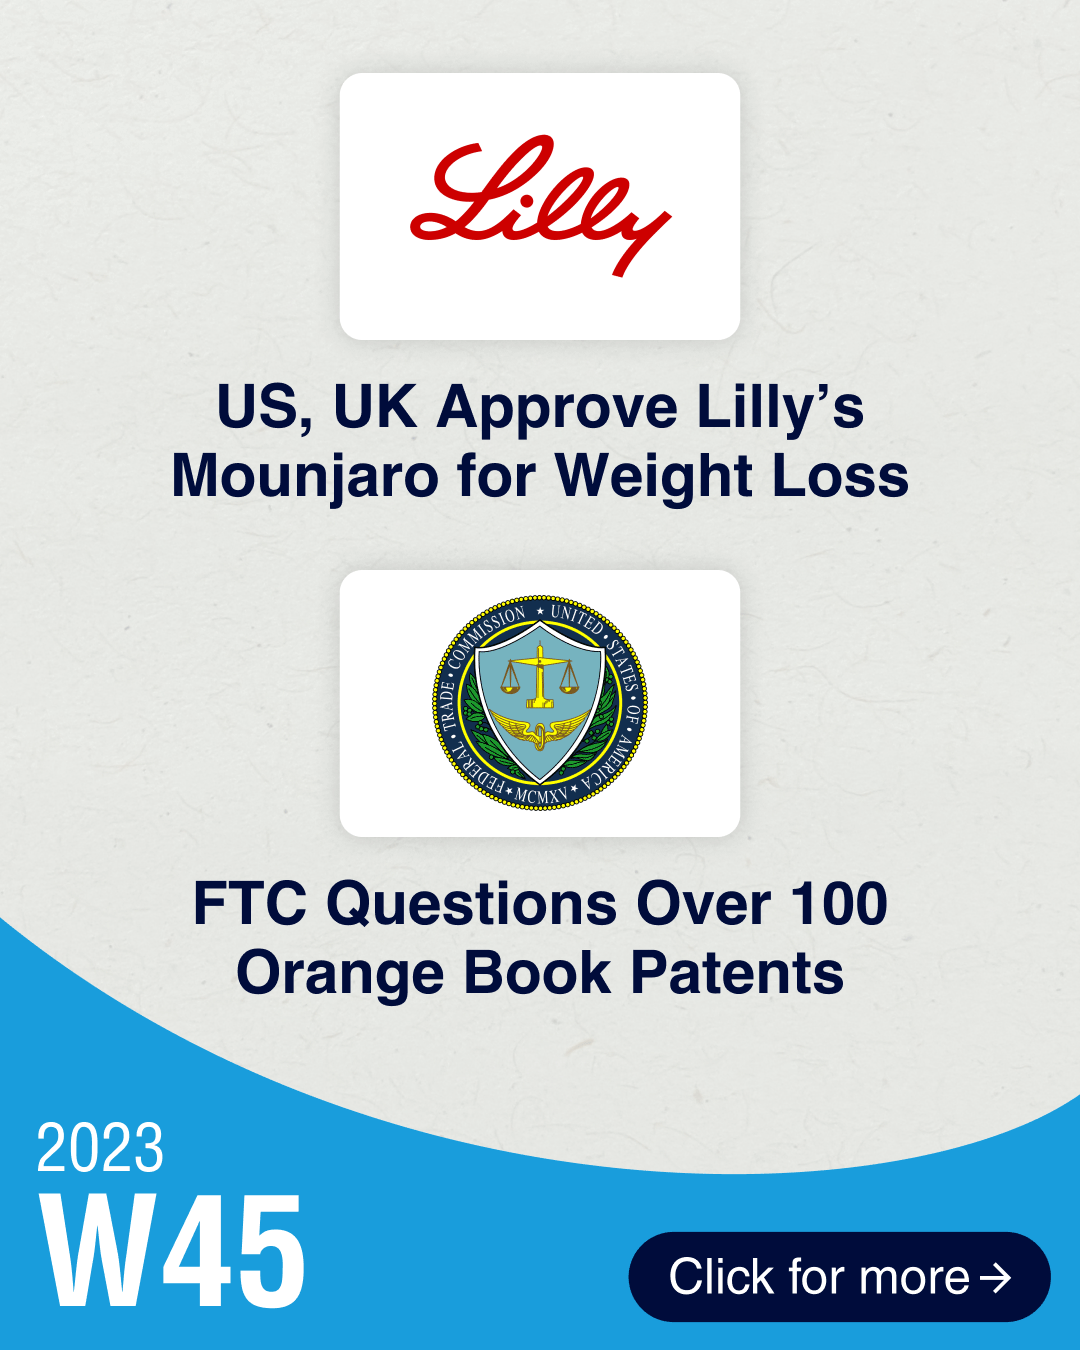 US, UK okay Lilly’s Mounjaro for weight loss; FTC questions over 100 Orange Book patents